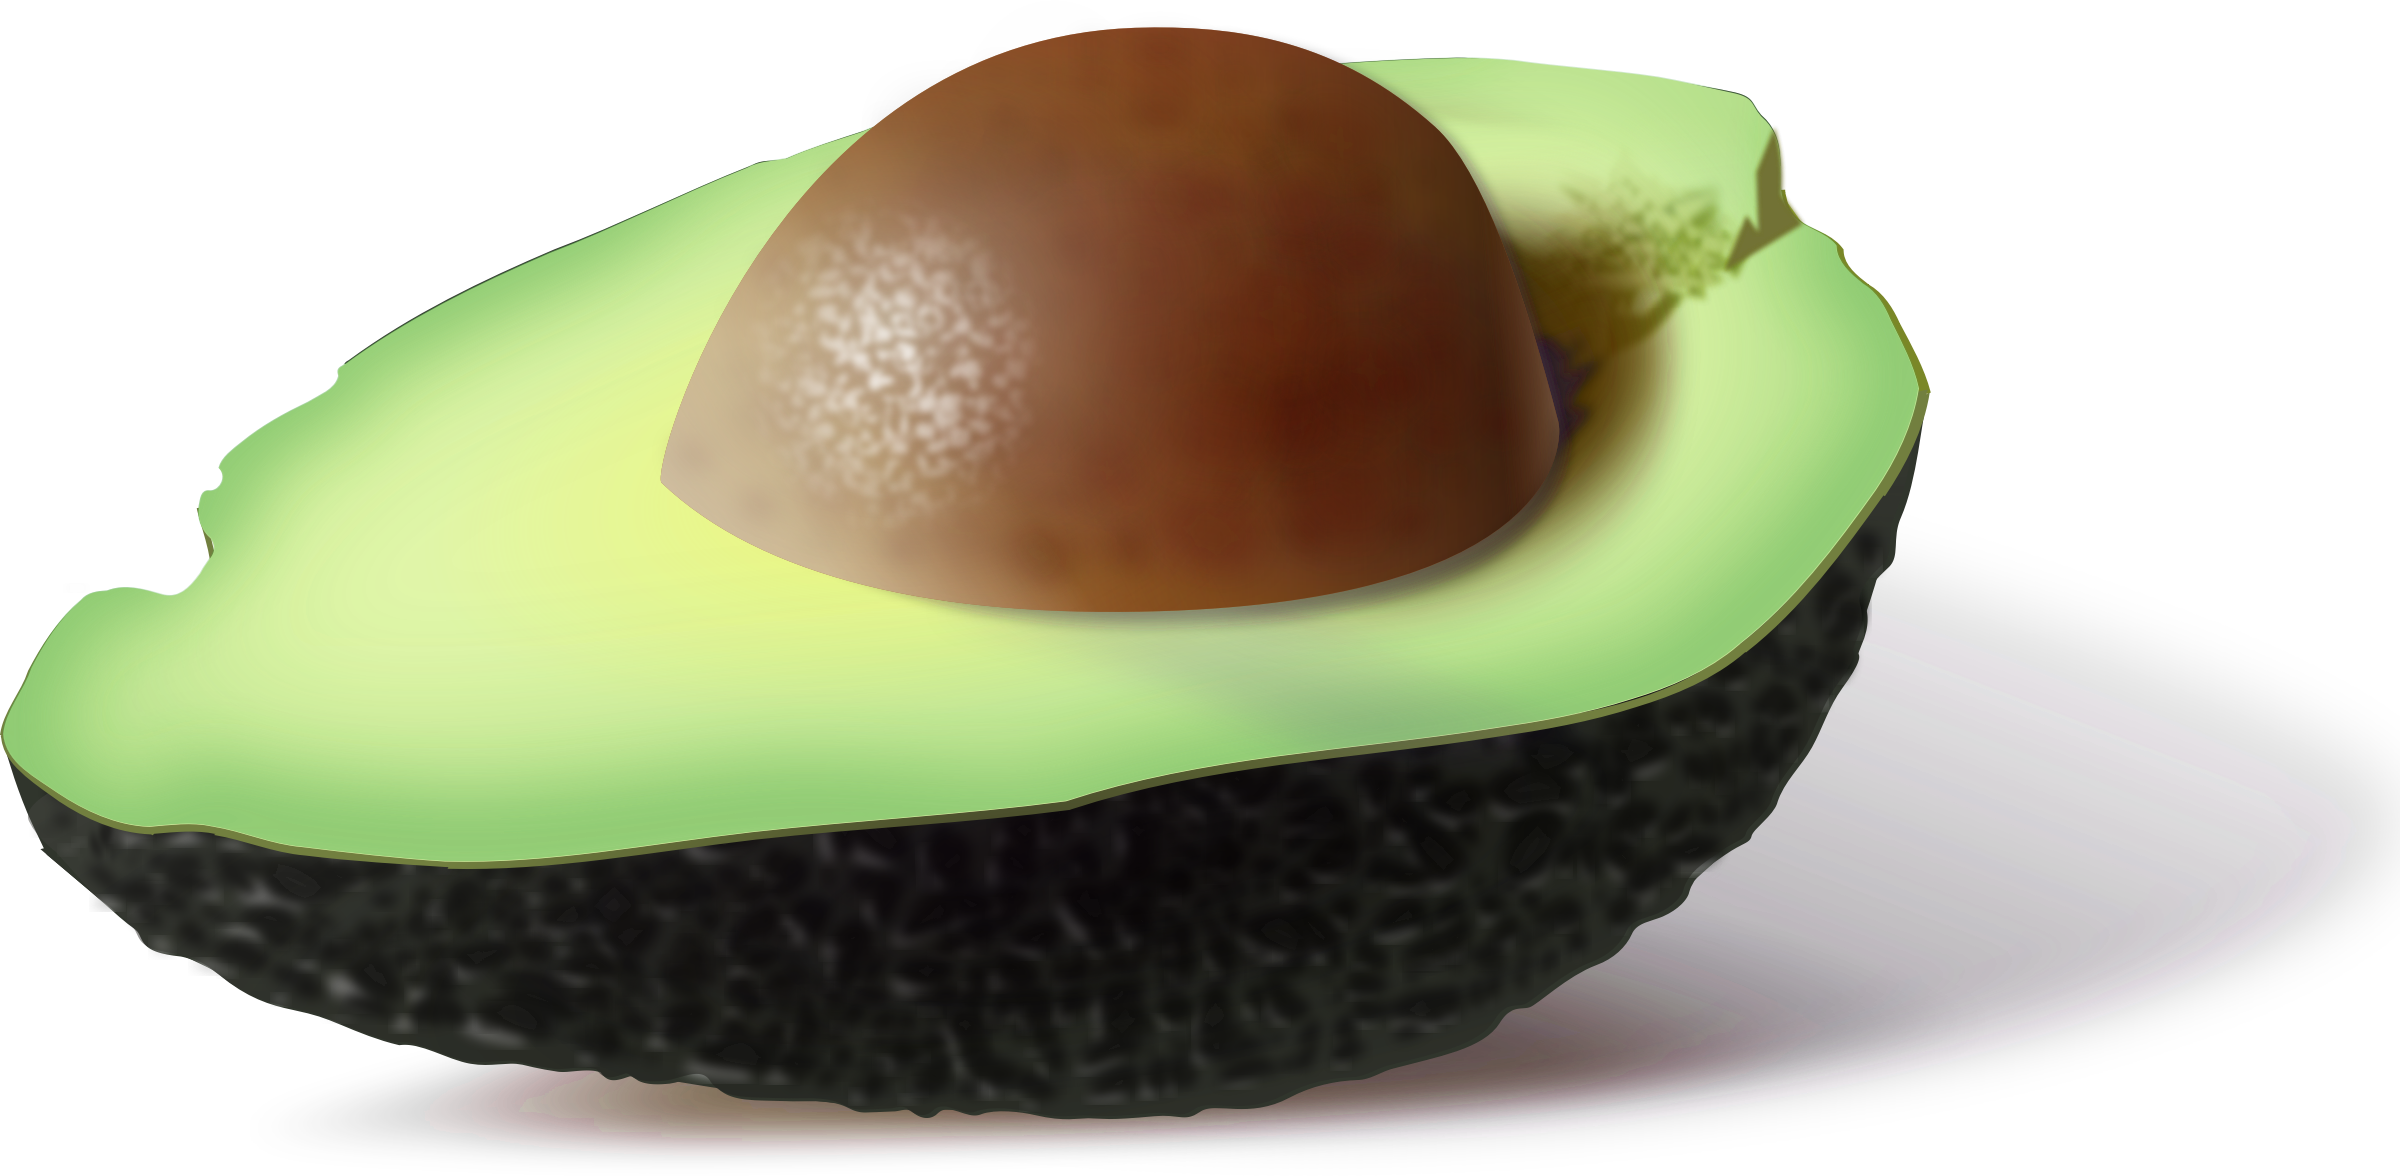 Half Avocadowith Pit